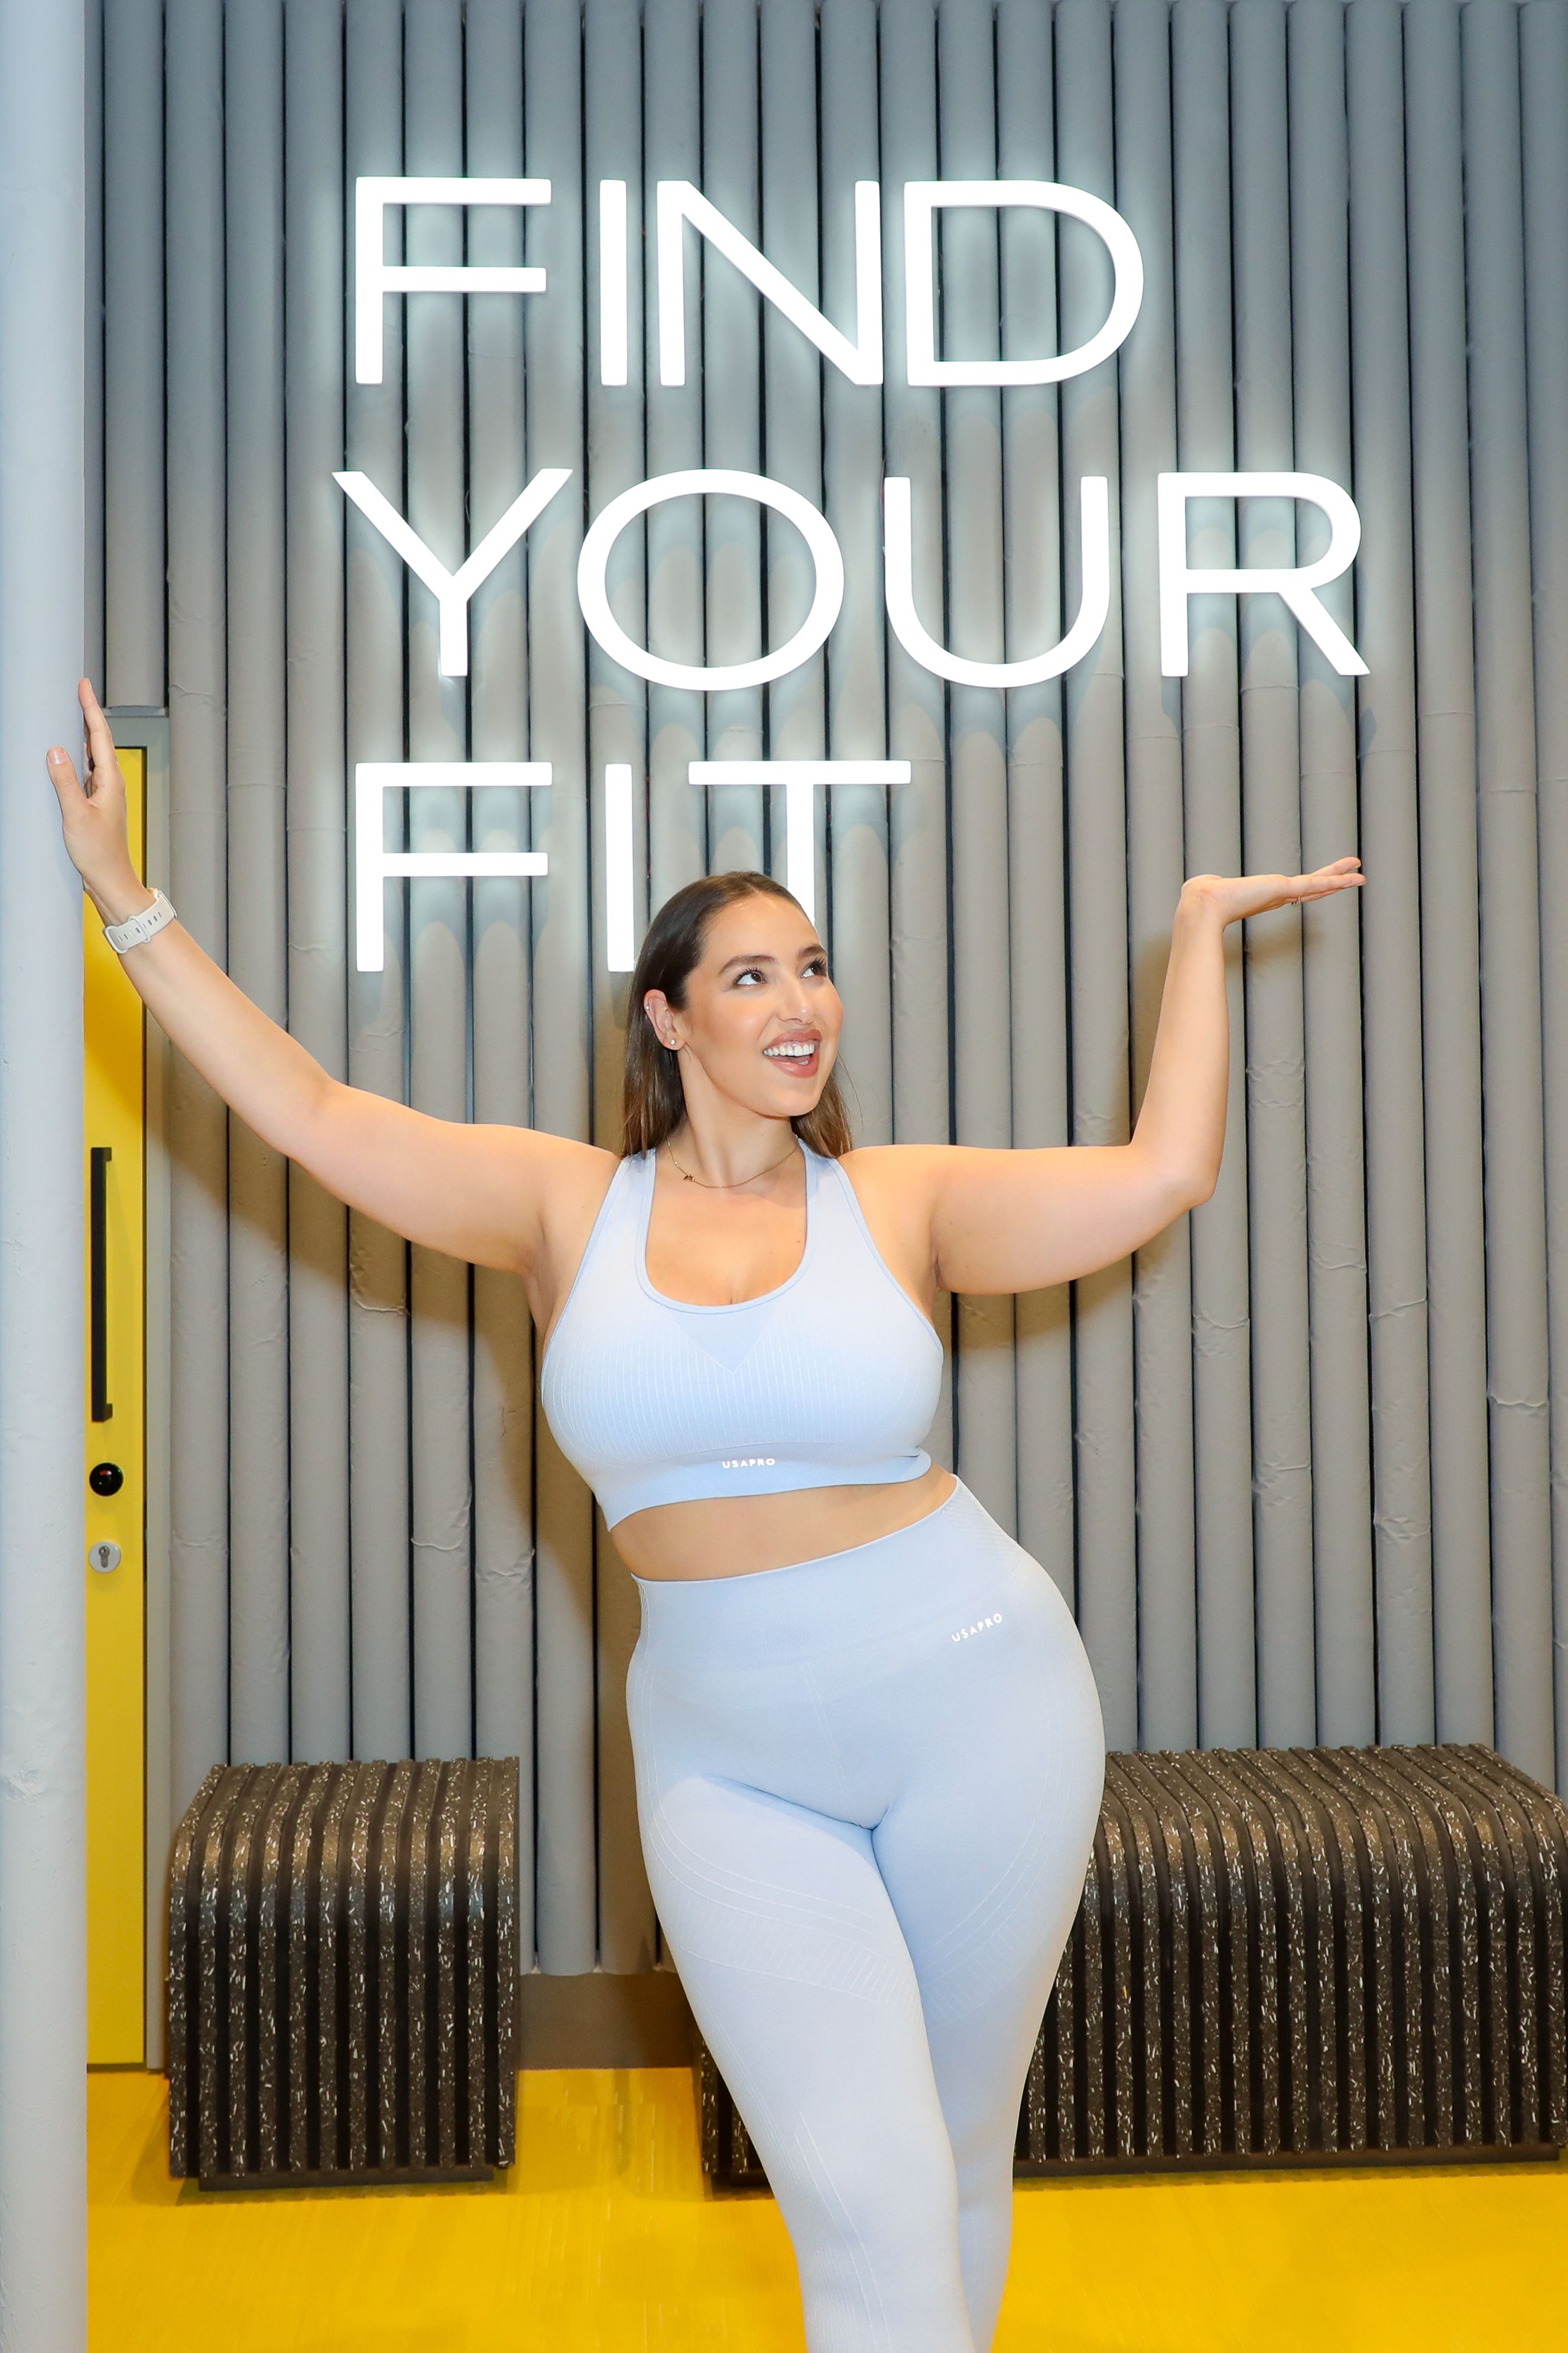 The best thing to wear to the gym if you have bigger boobs